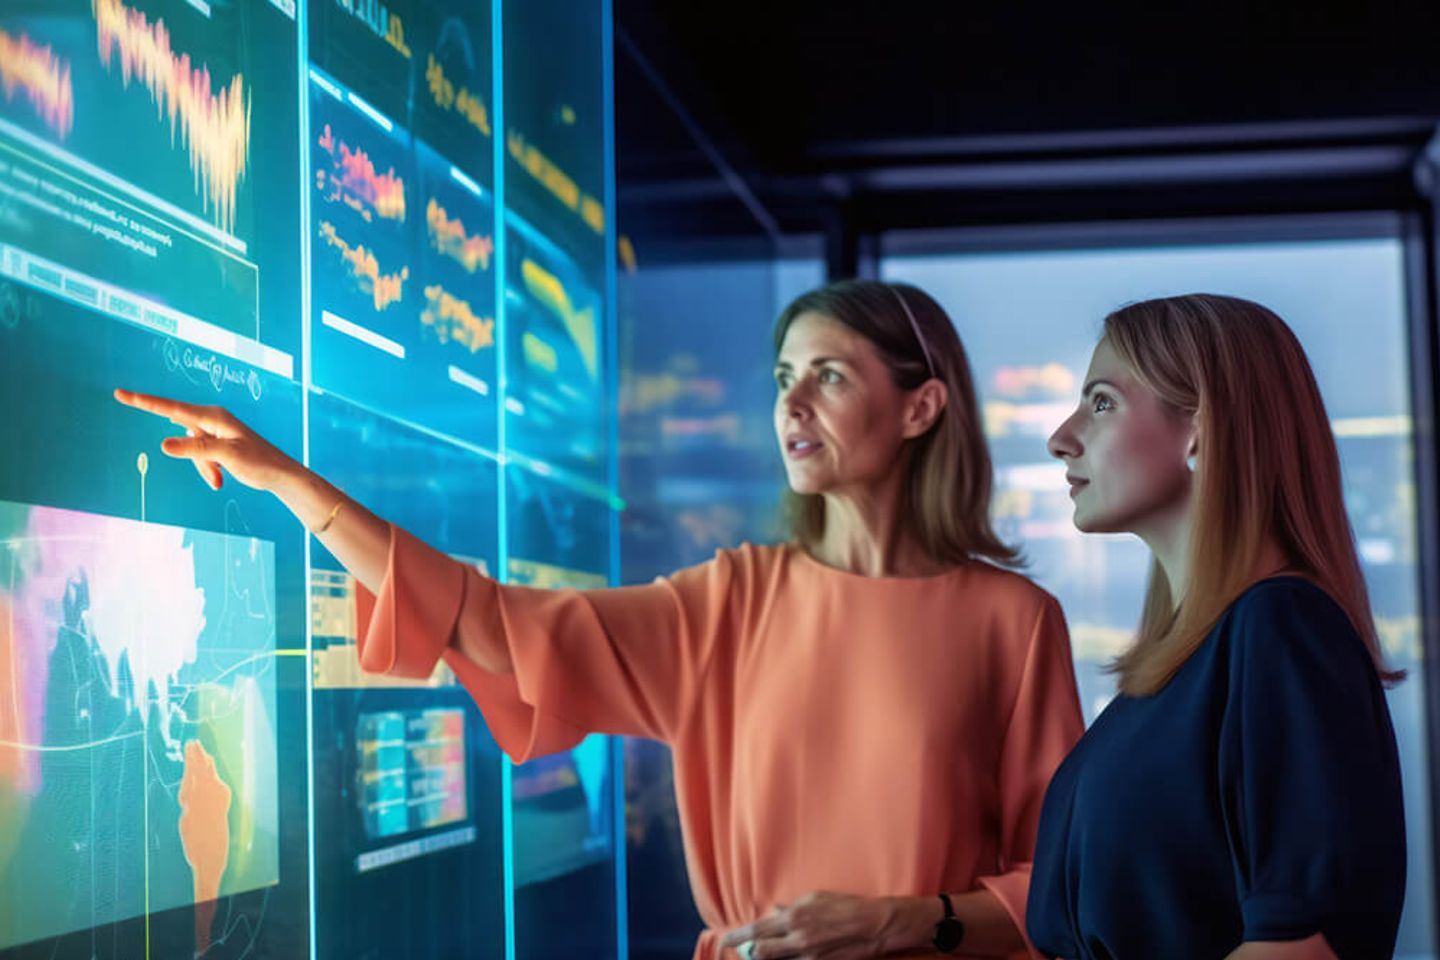 Two women look at a digital interface with visualized data